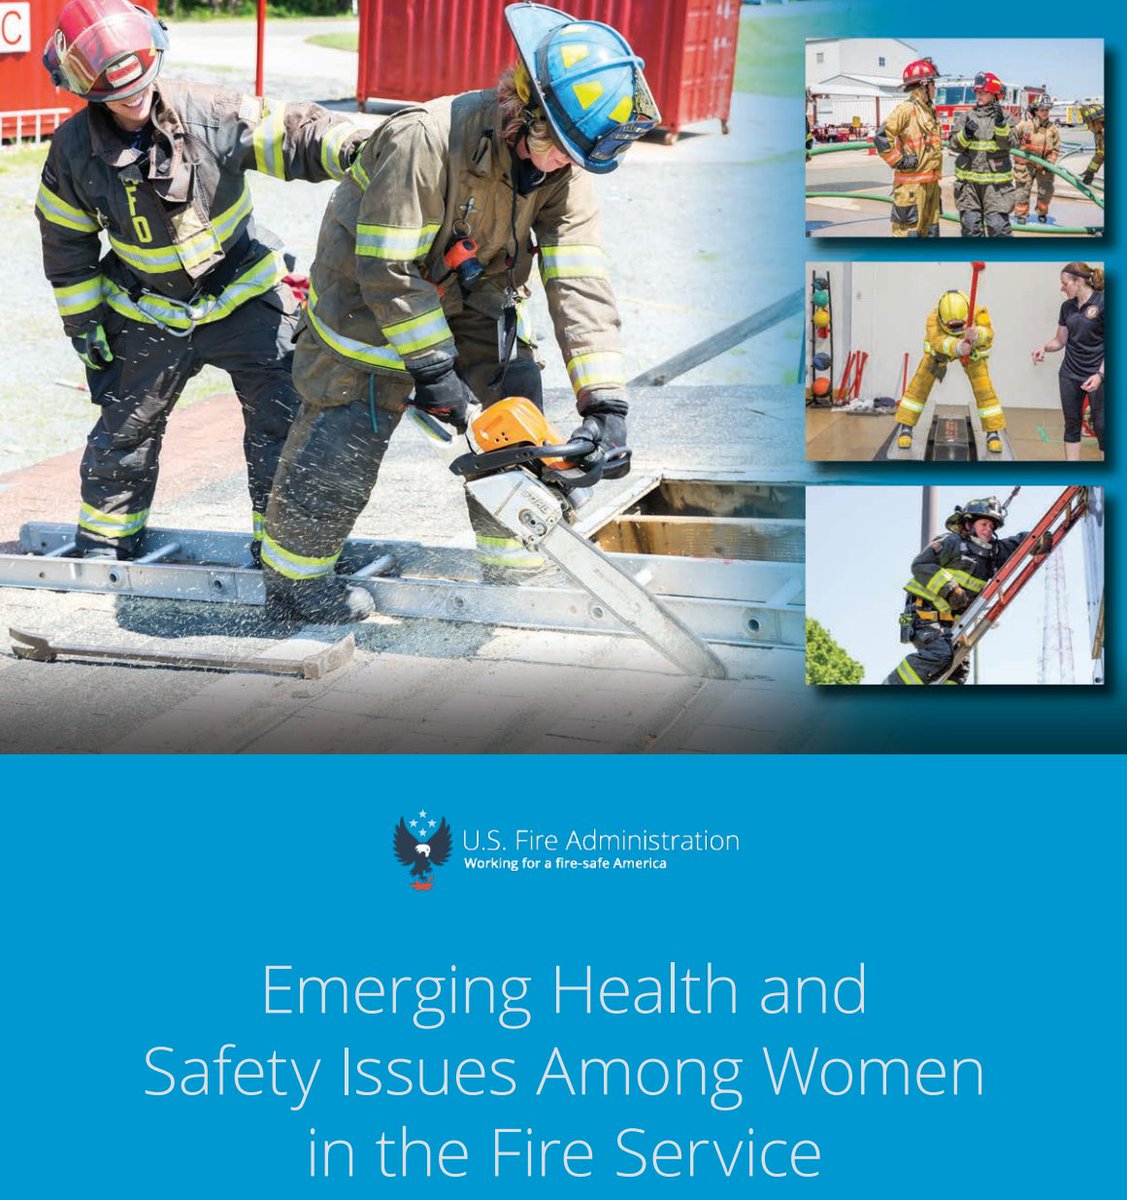 For women in the fire service, exposure impacts are complicated by factors such as interactions between harmful chemicals and biological factors due to behaviors and biological history.